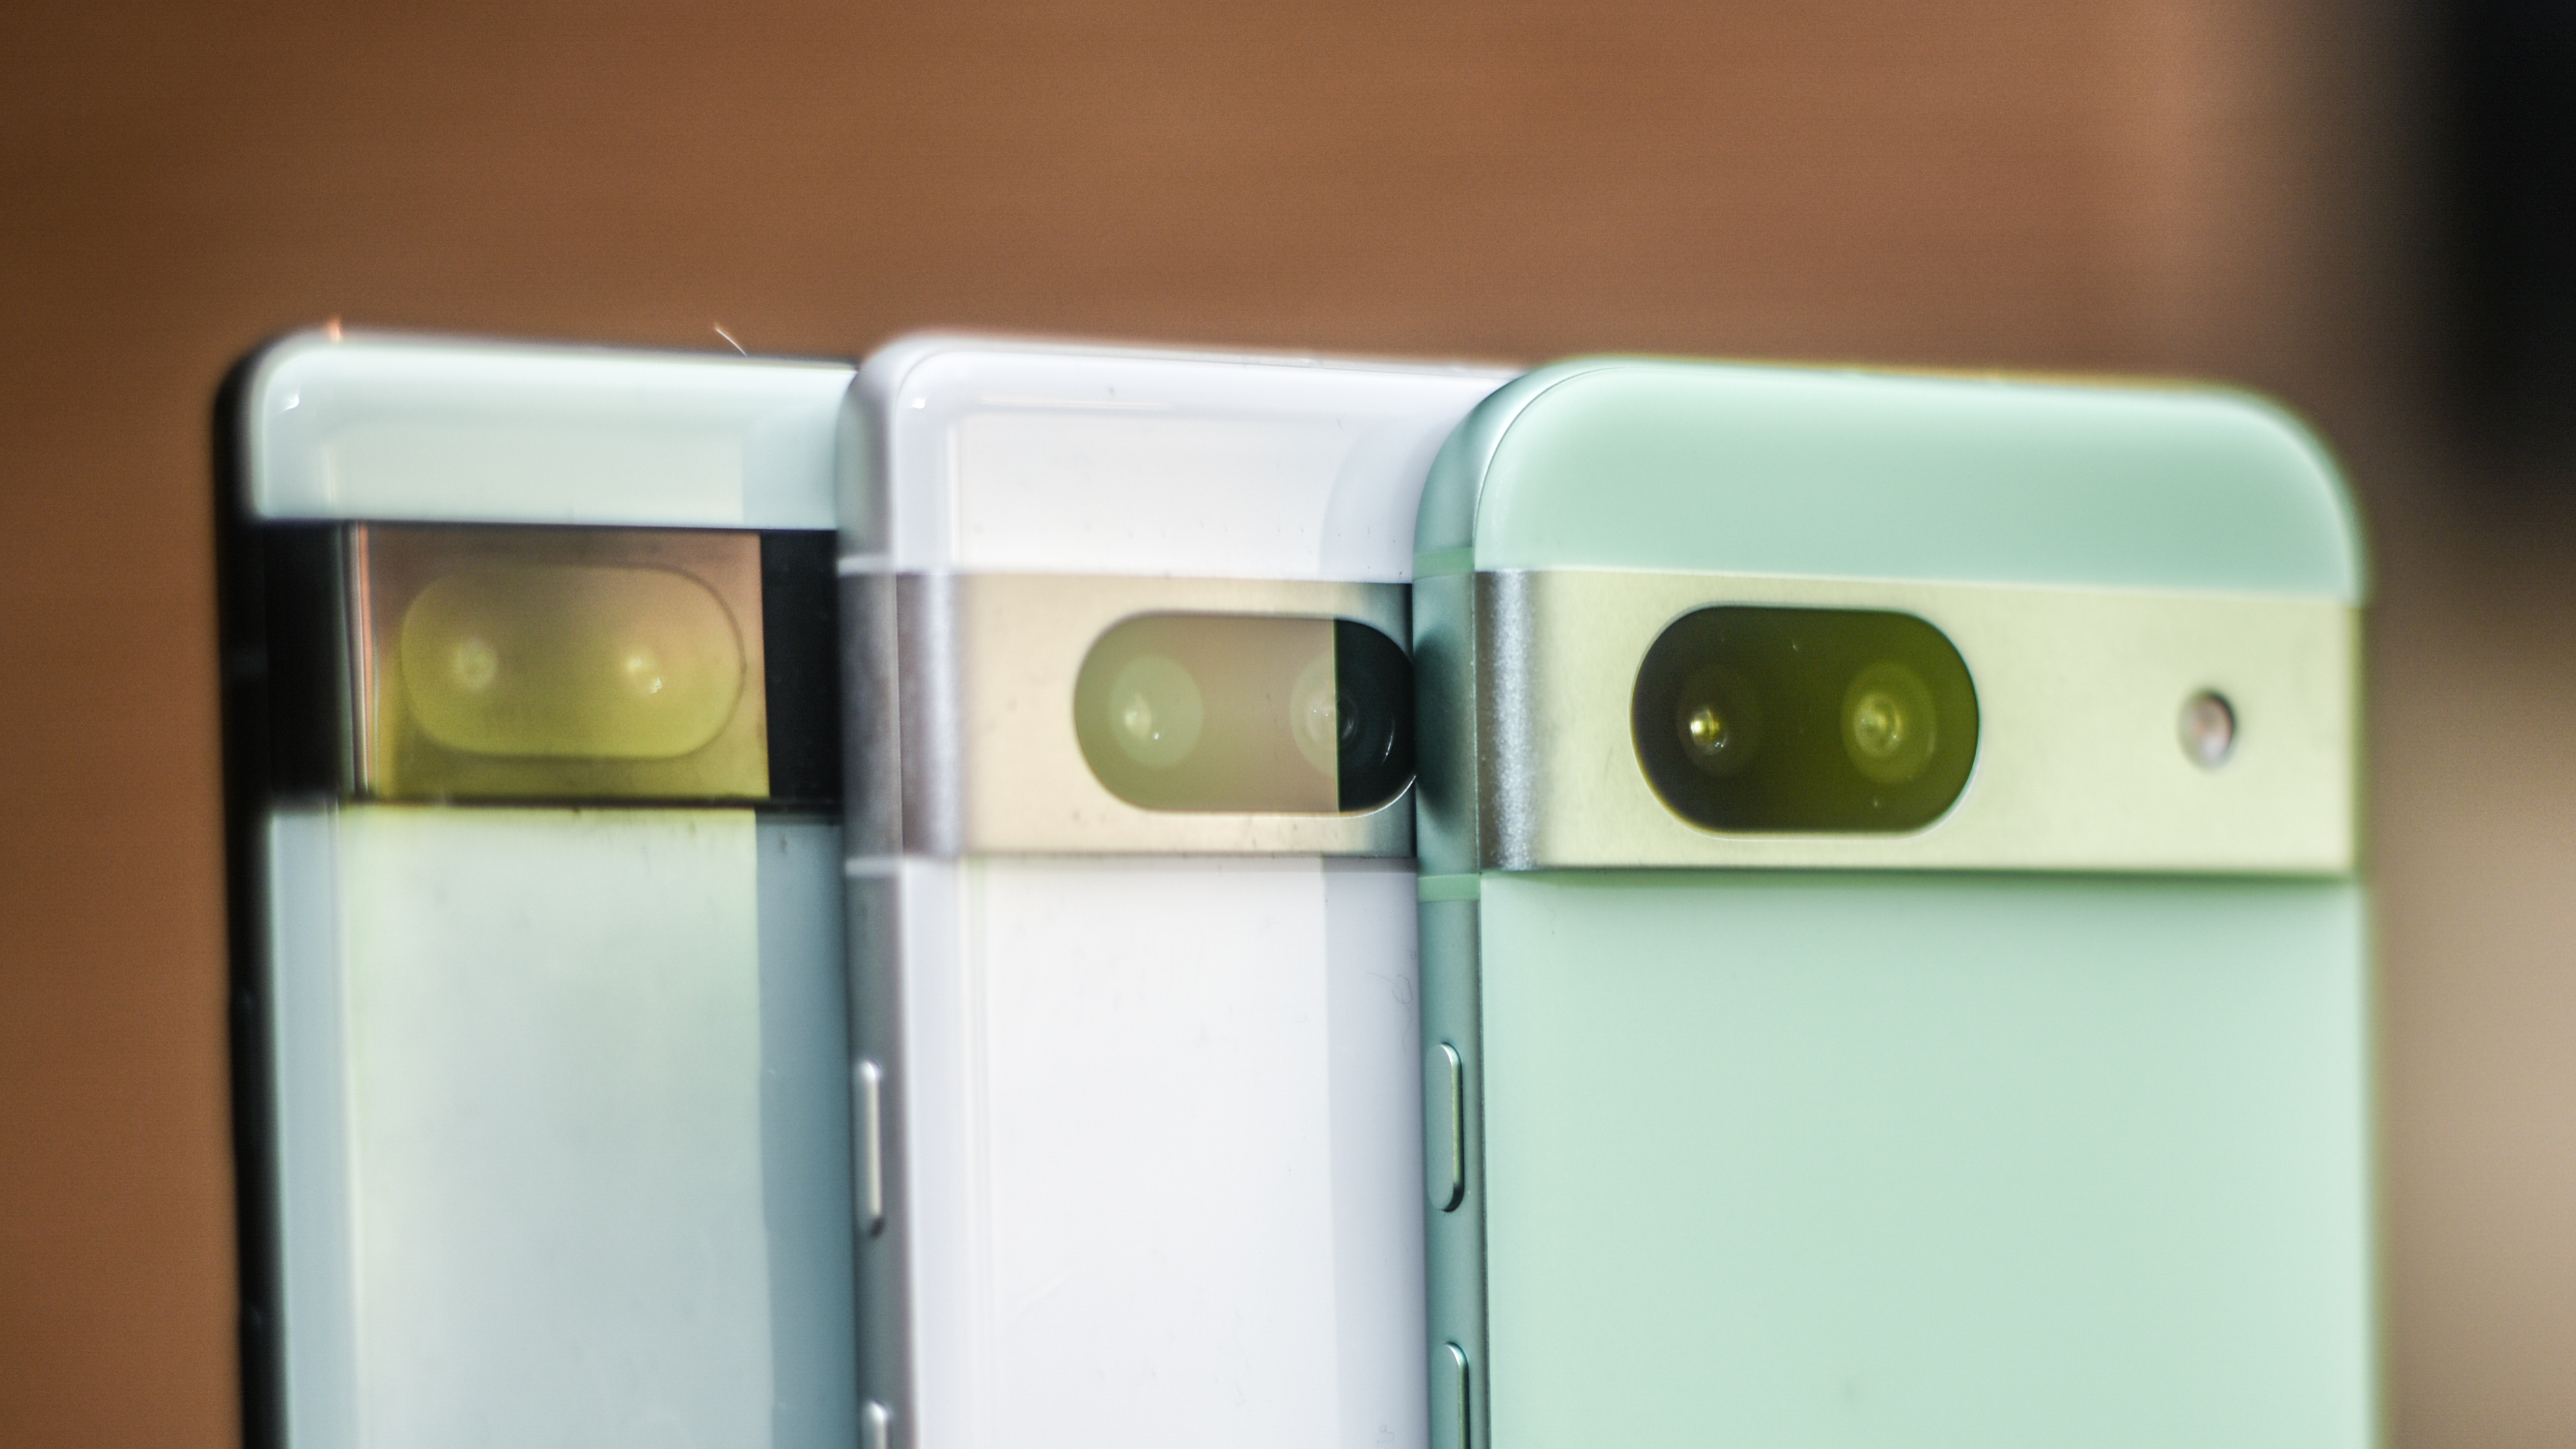 Google Pixel 8a in front of Pixel 7a in white and Pixel 6a in two-tone green and yellowish green